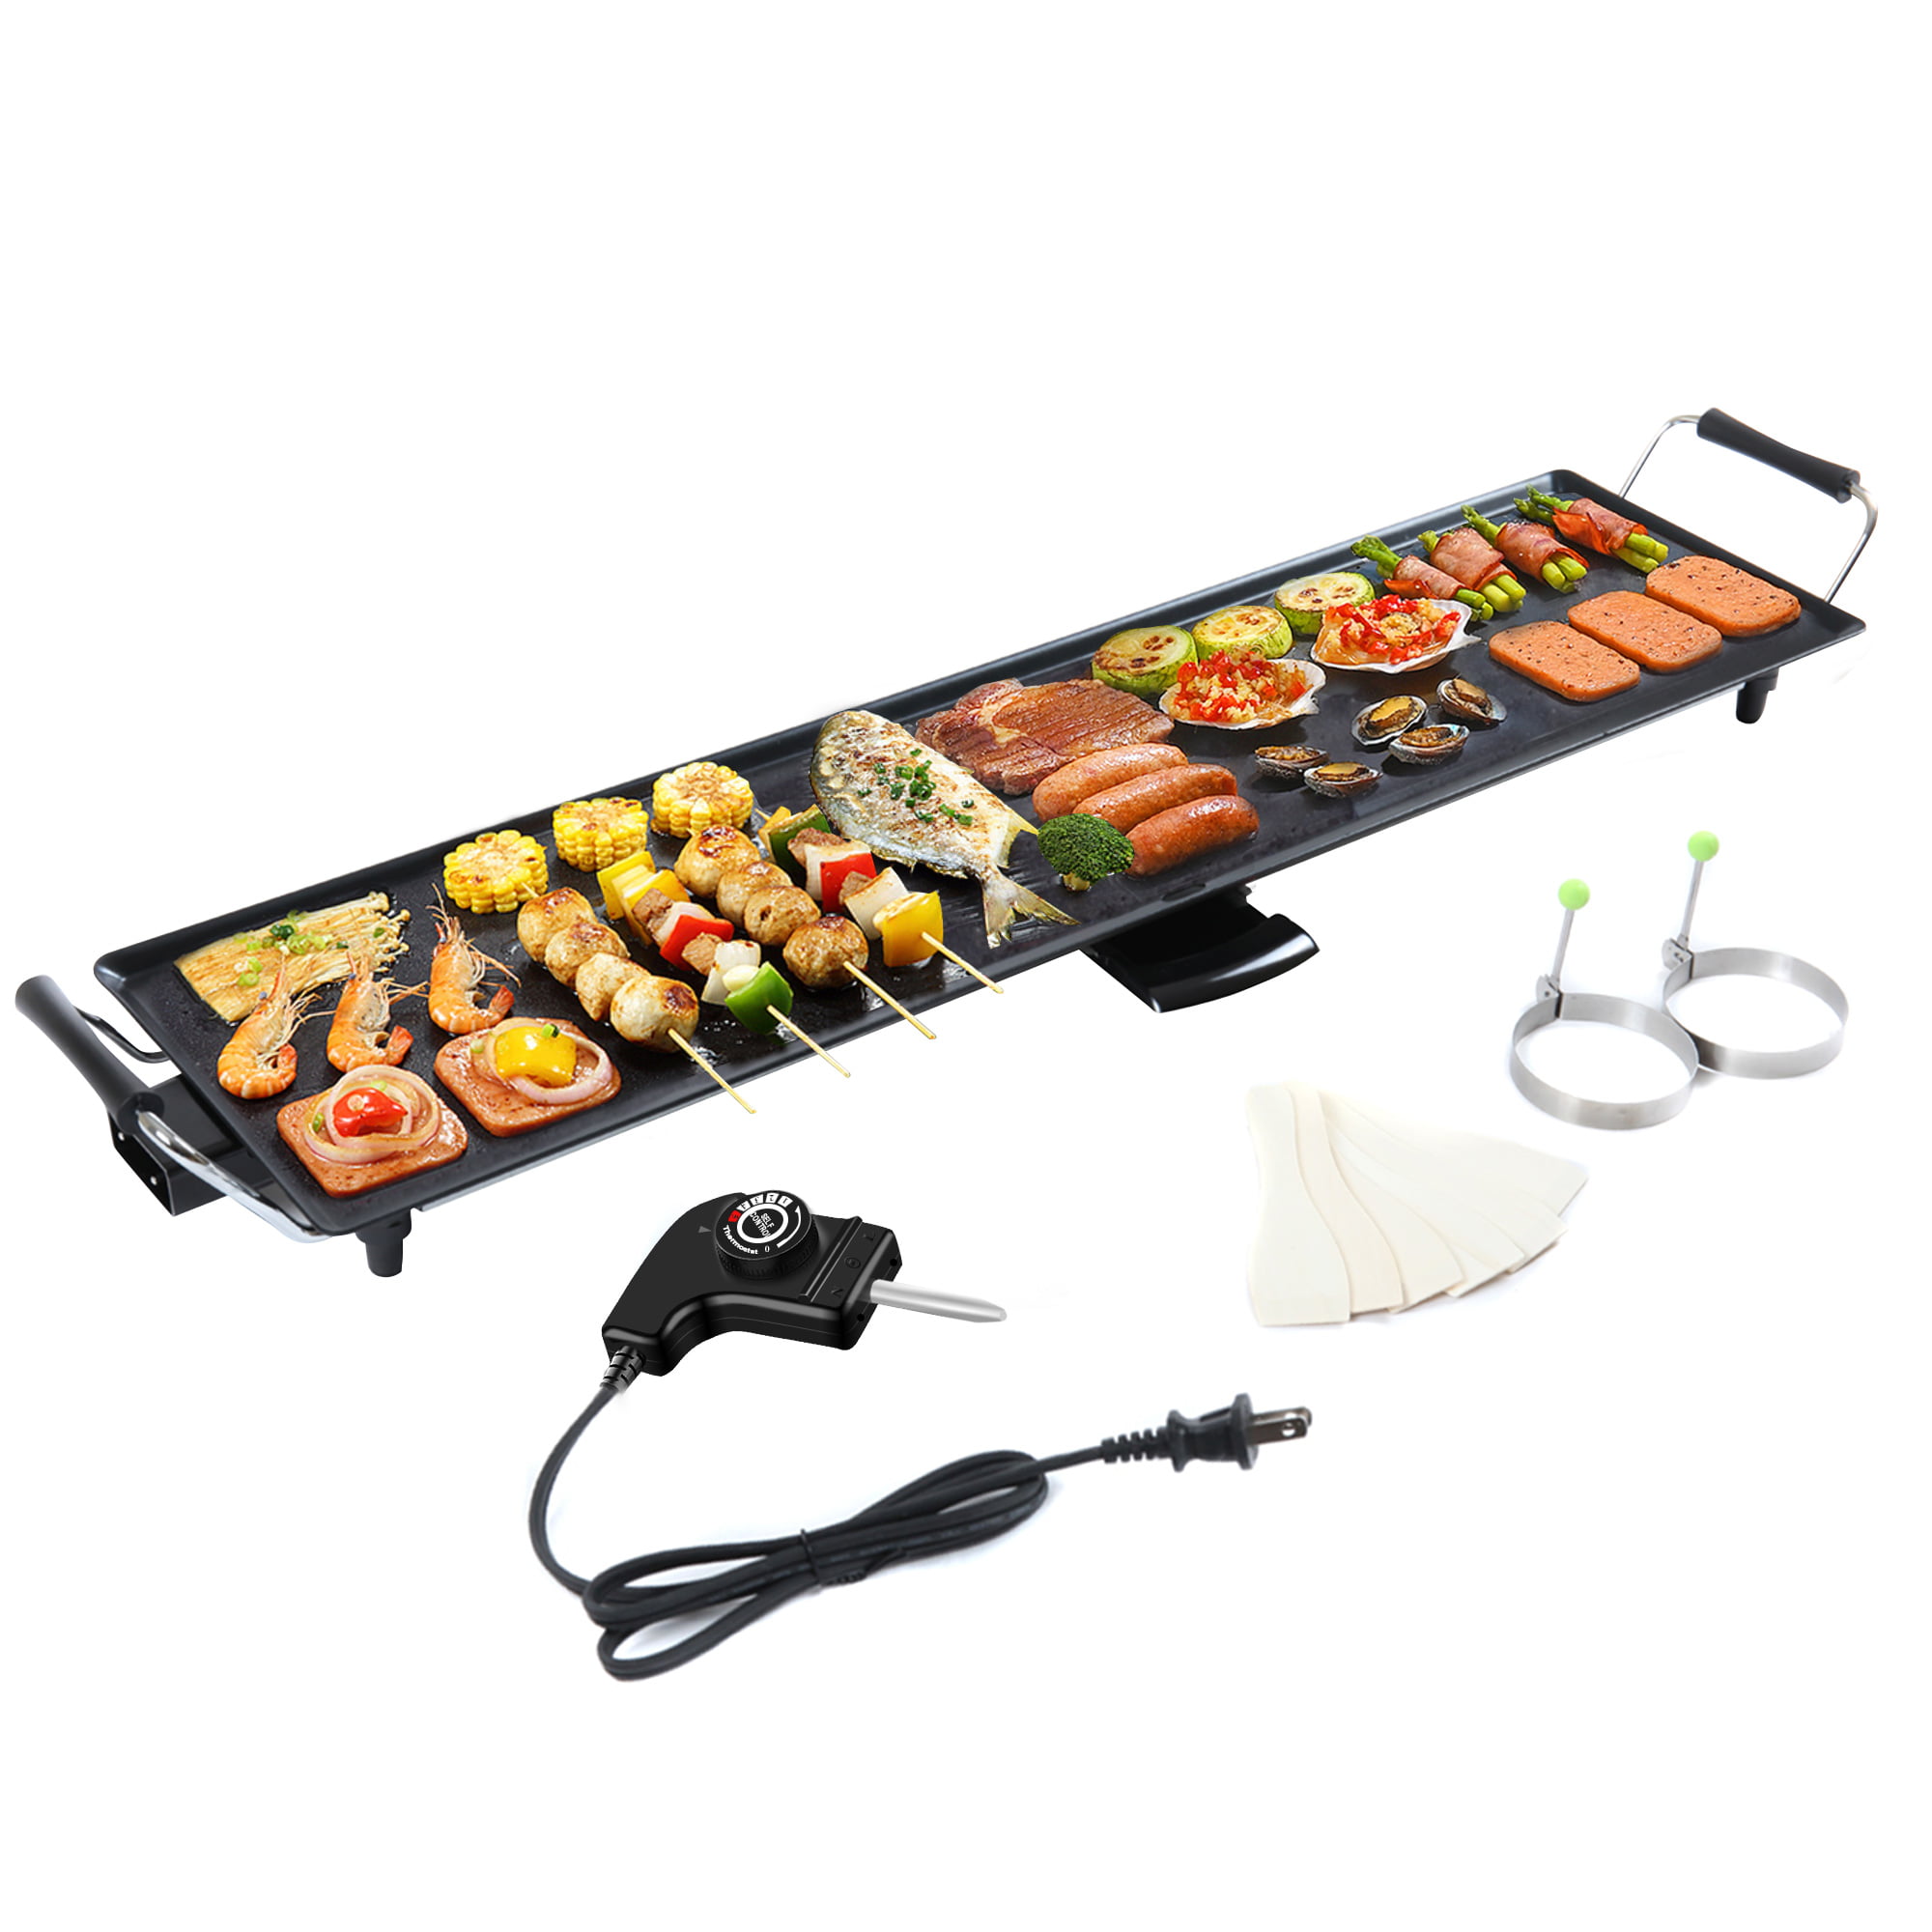 Premium Nonstick Surface Large BBQ Tabletop Griddle Plate Electric Grill Easy to Clean,48x28cm Teppanyaki Grill Plate Adjustable Temperature Camping BBQ Hot Plate